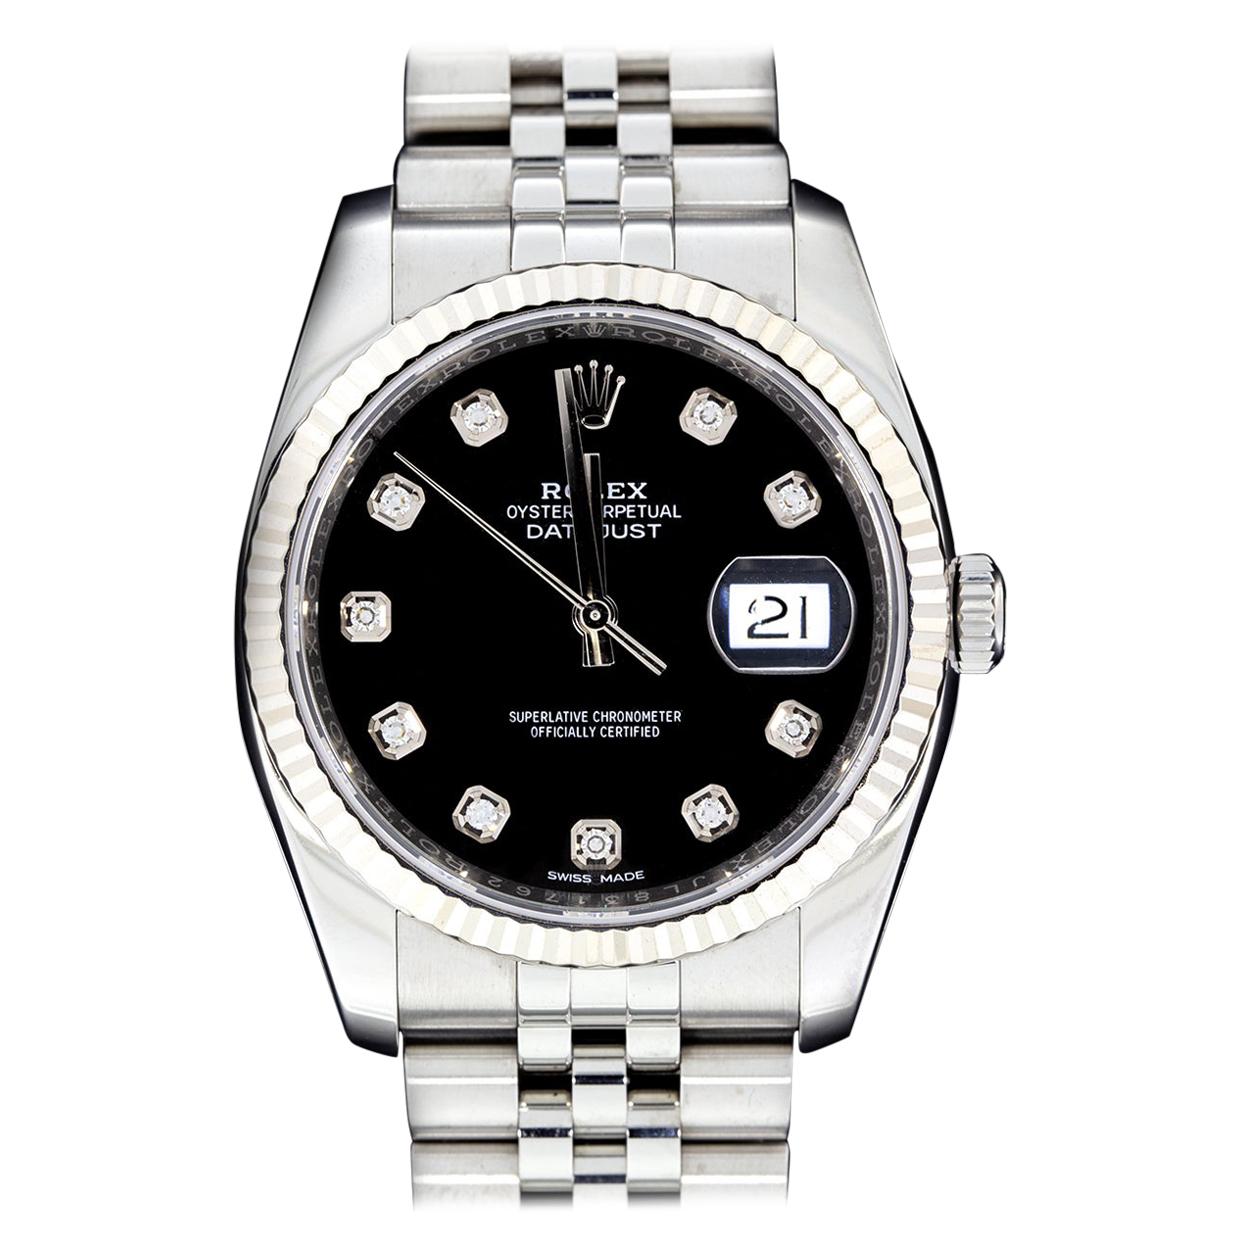 Rolex Stainless Steel 36mm Datejust Watch with Black Diamond Dial, Model 116234